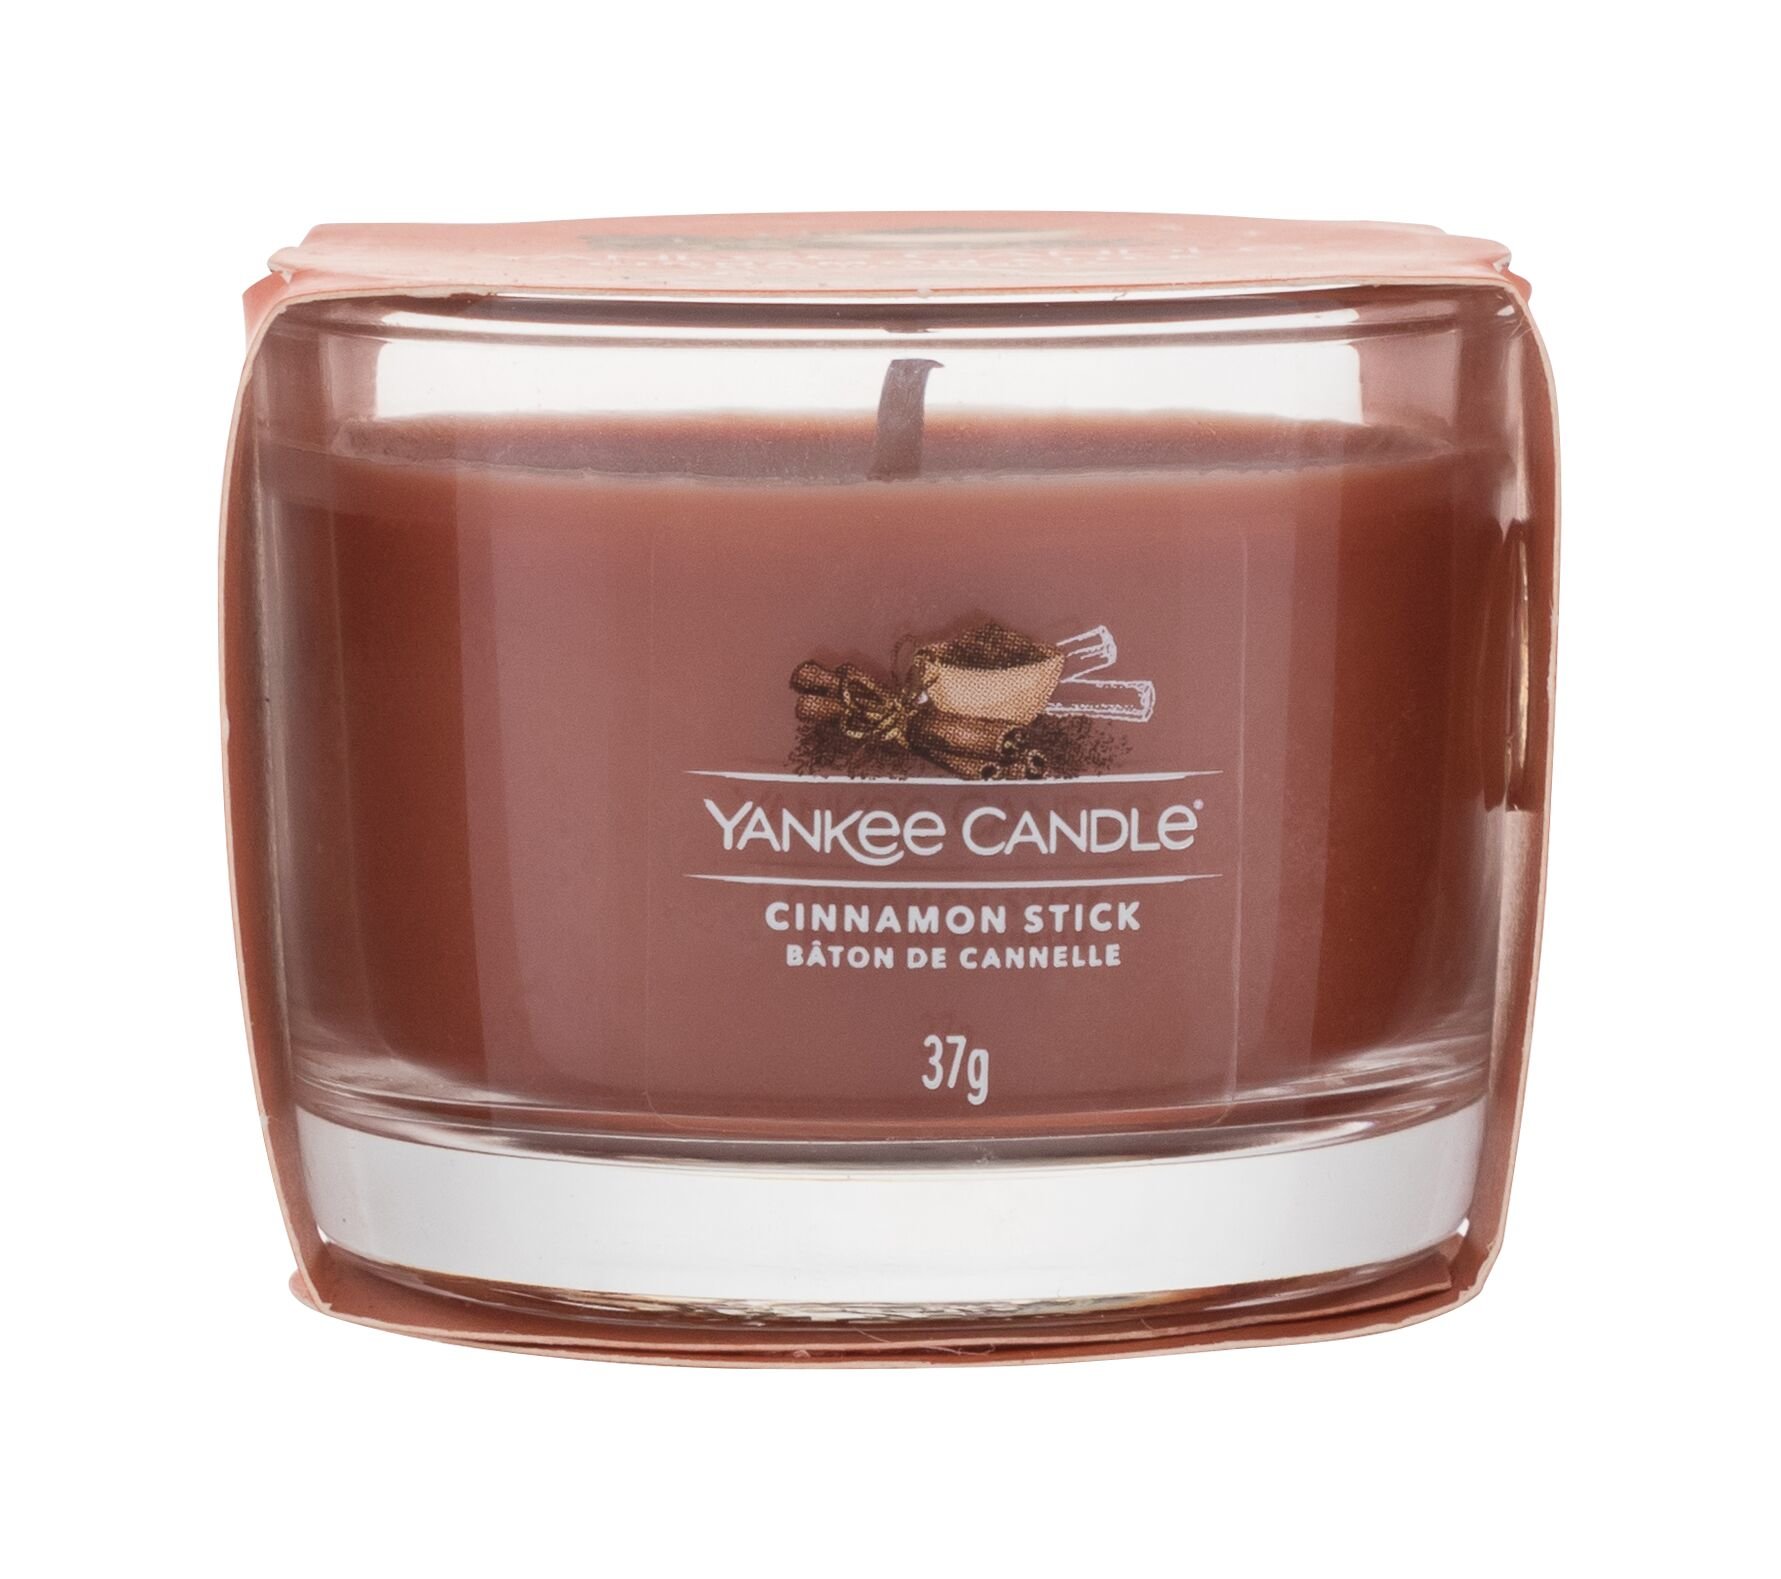 Yankee Candle Cinnamon Stick 37g Kvepalai Unisex Scented Candle